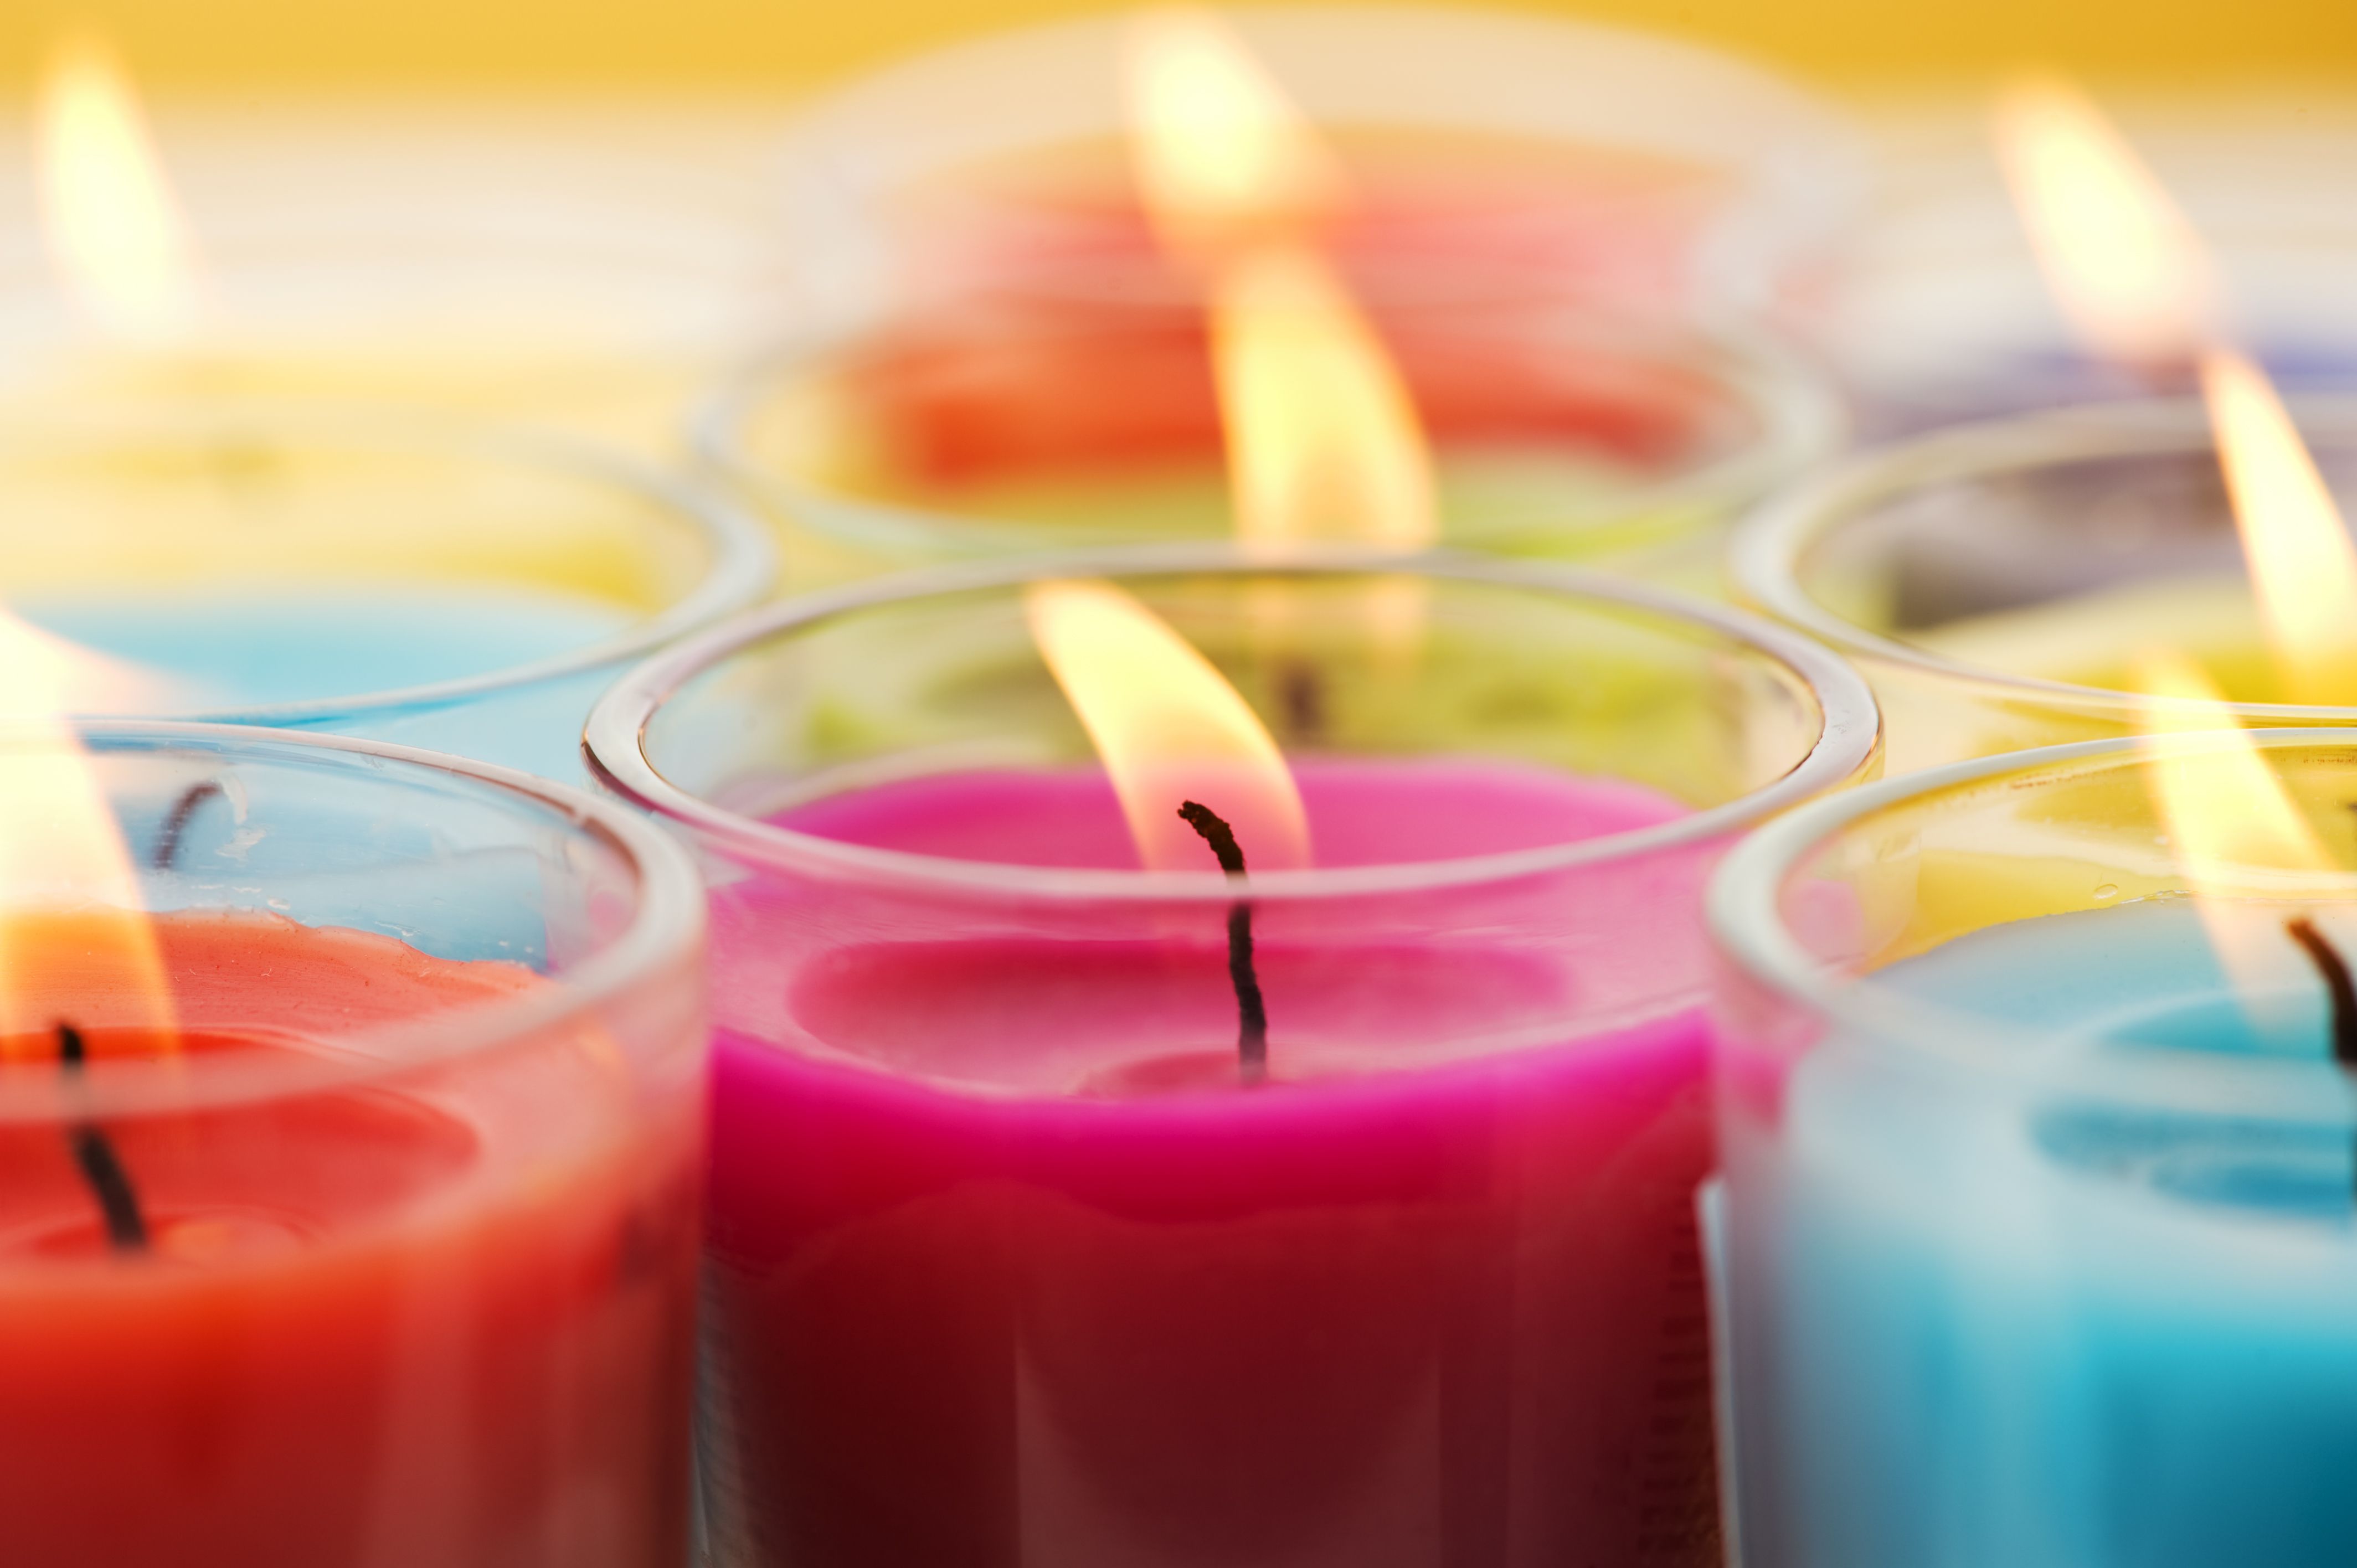 pretty scented candles